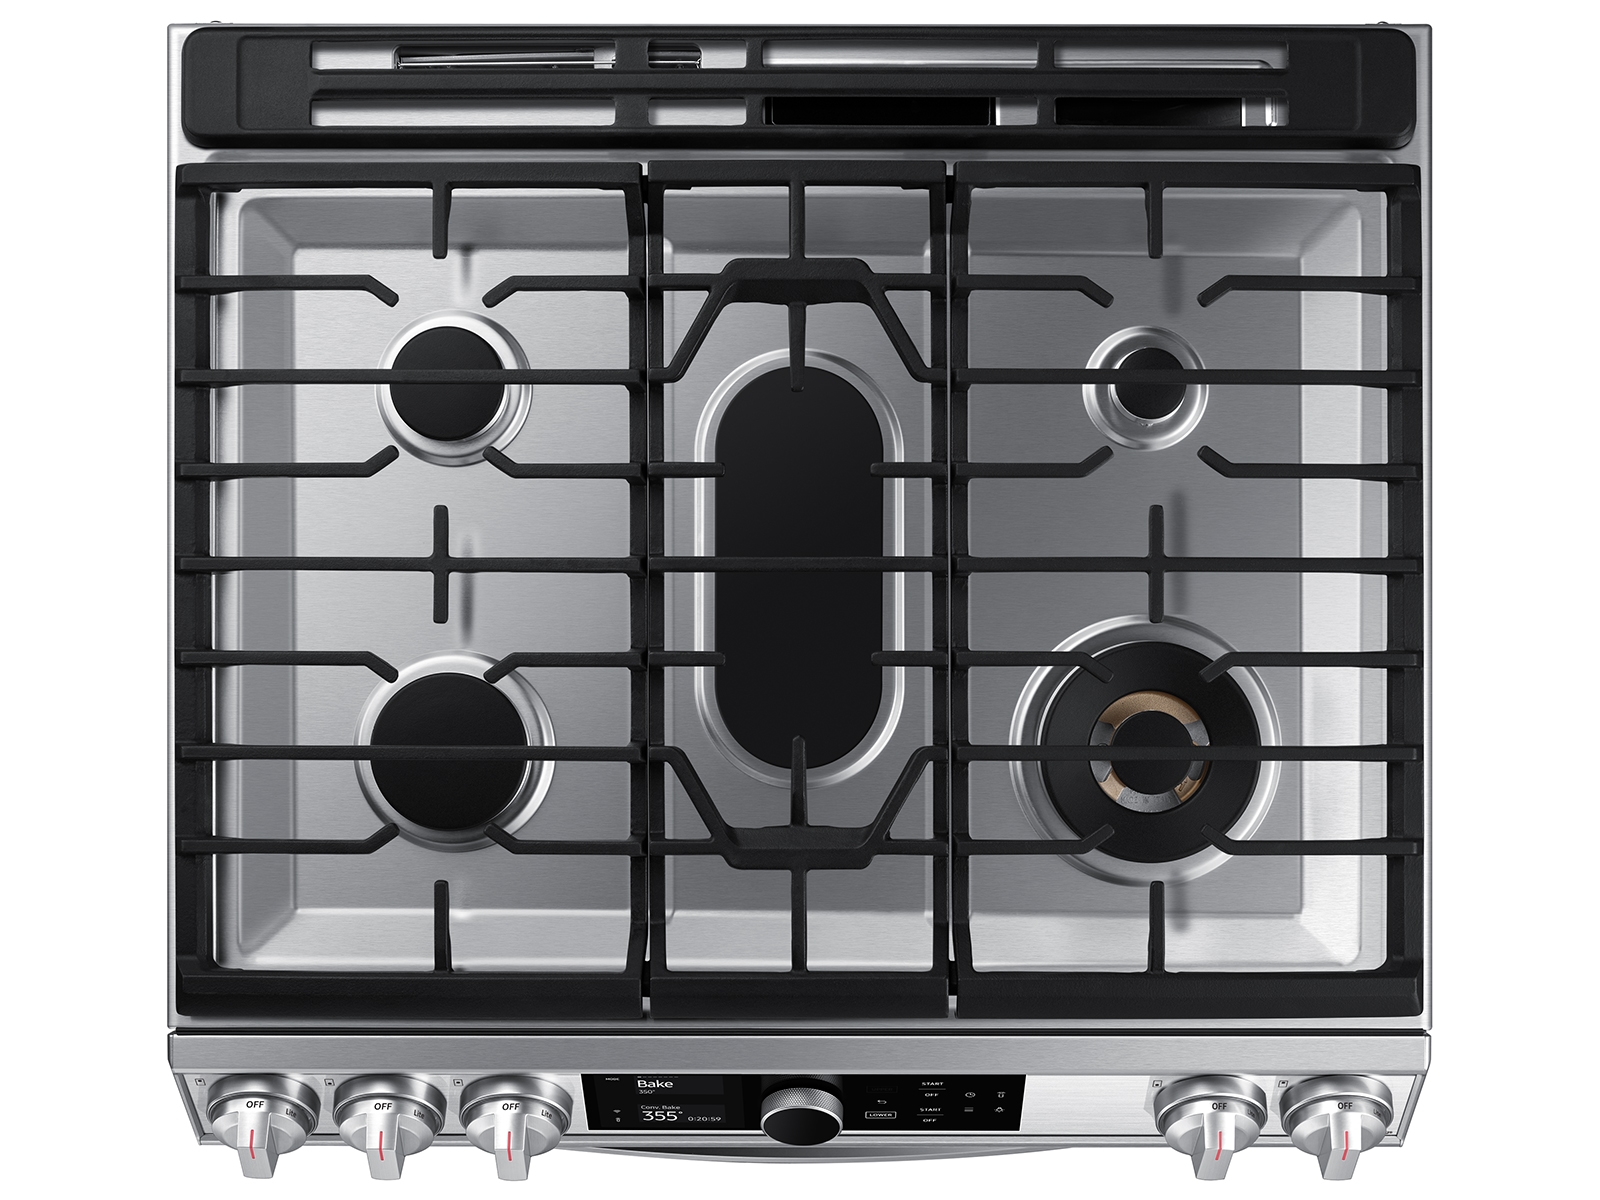 NE63T8751SG Samsung 30 Samsung Flex Duo Front Control Wifi Enabled  Slide-In Electric Range with Air